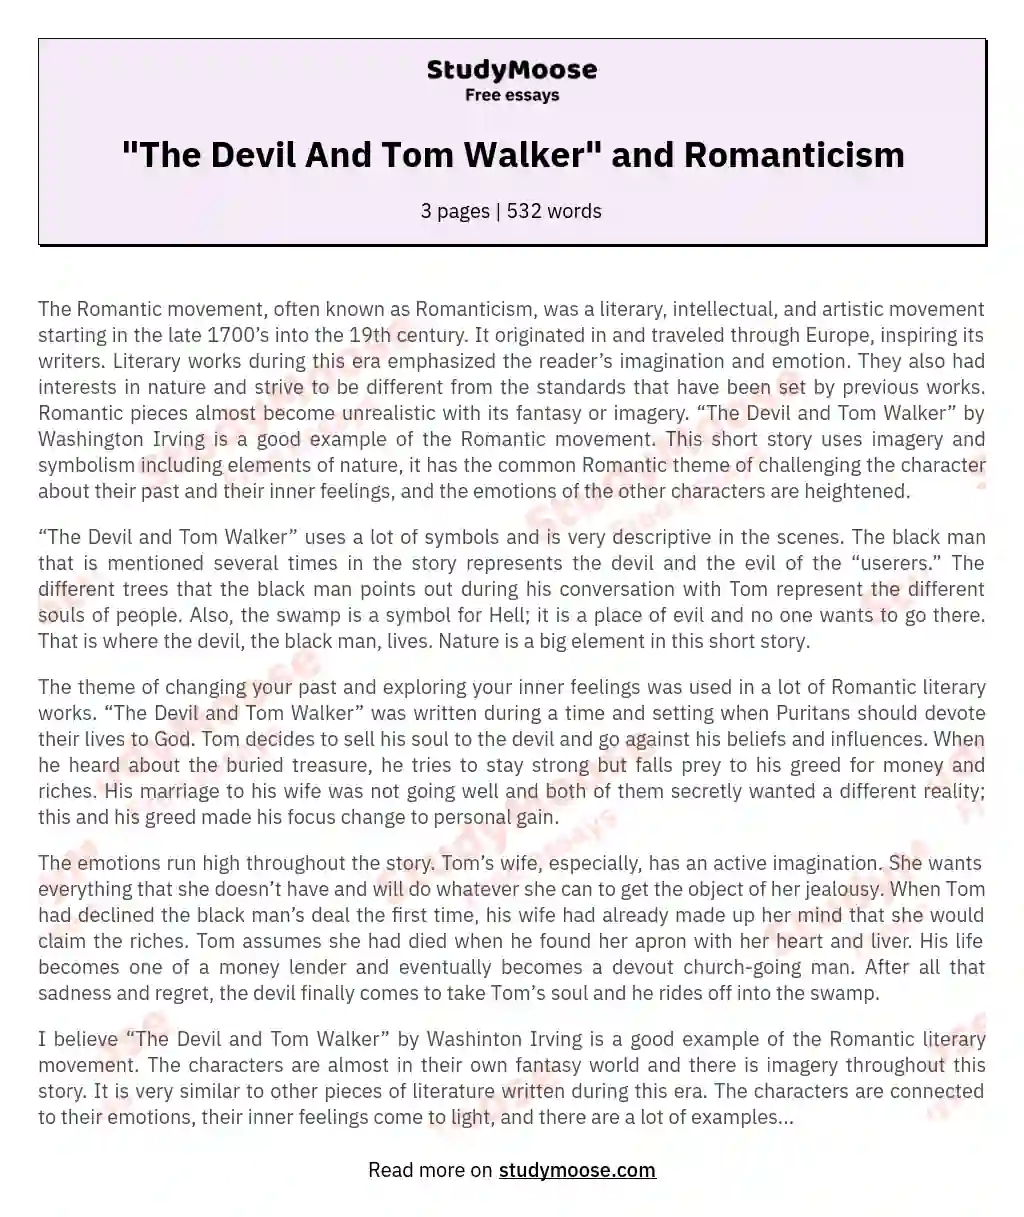 "The Devil And Tom Walker" and Romanticism essay